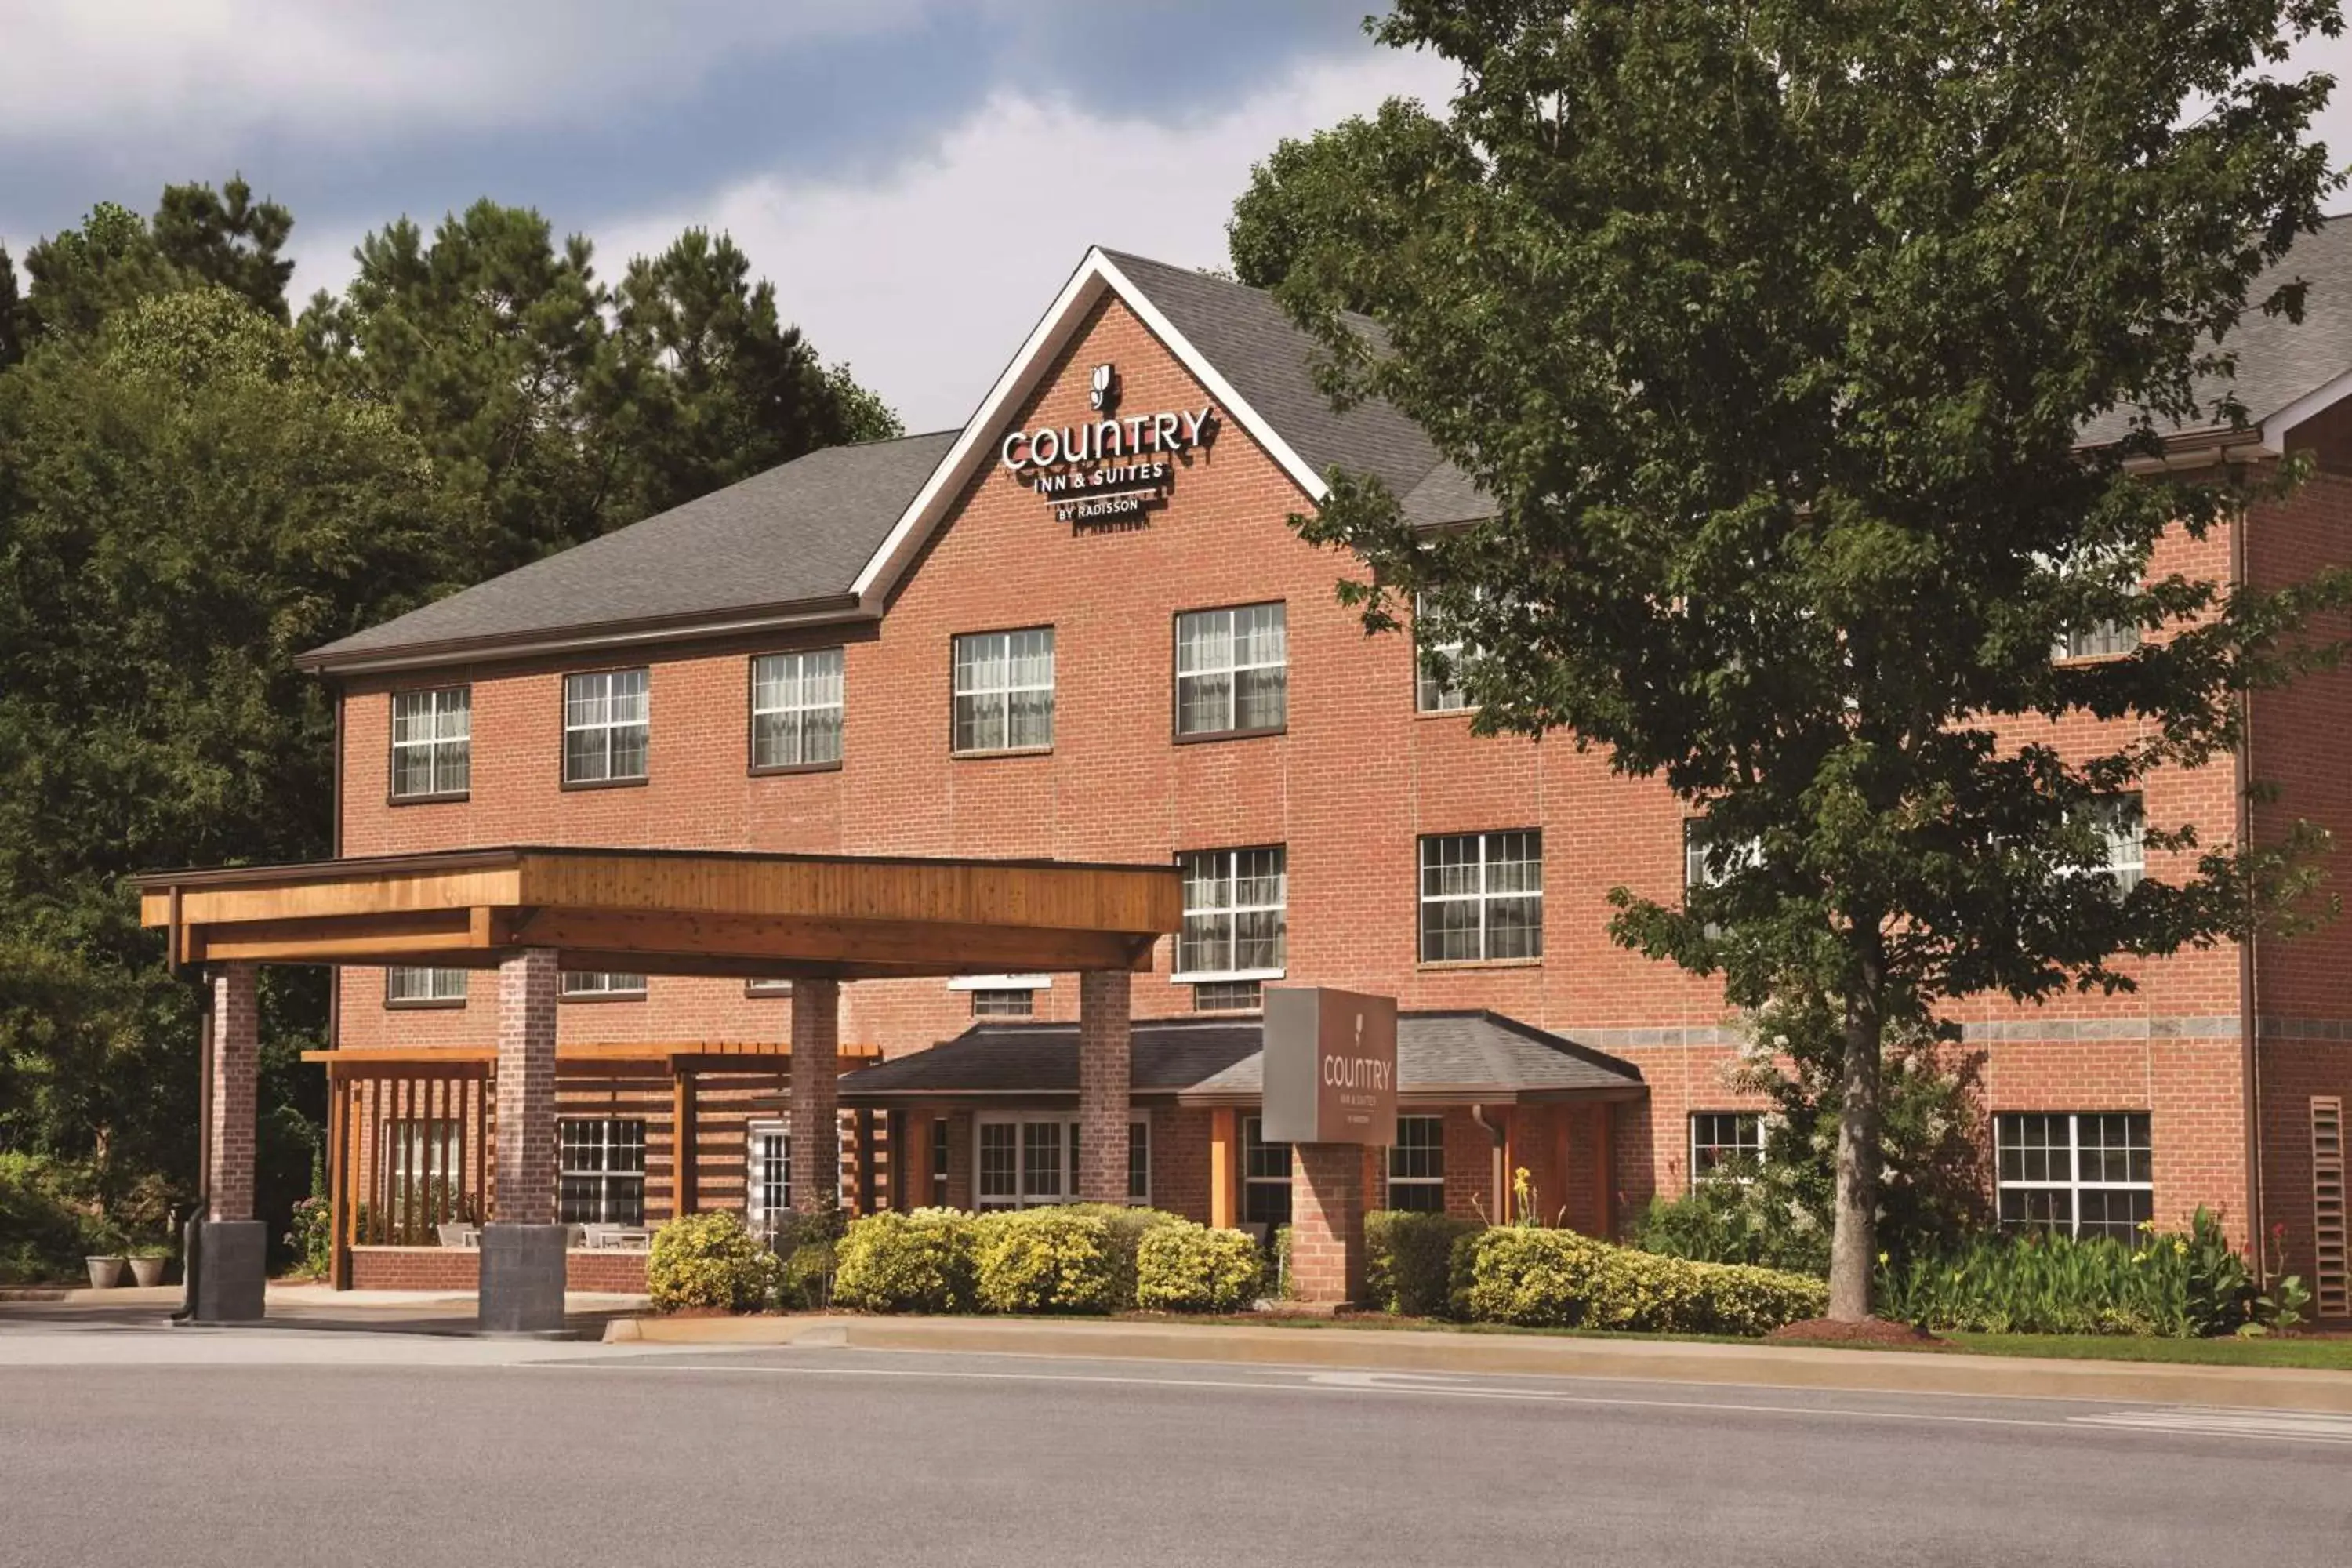 Property building in Country Inn & Suites by Radisson, Newnan, GA